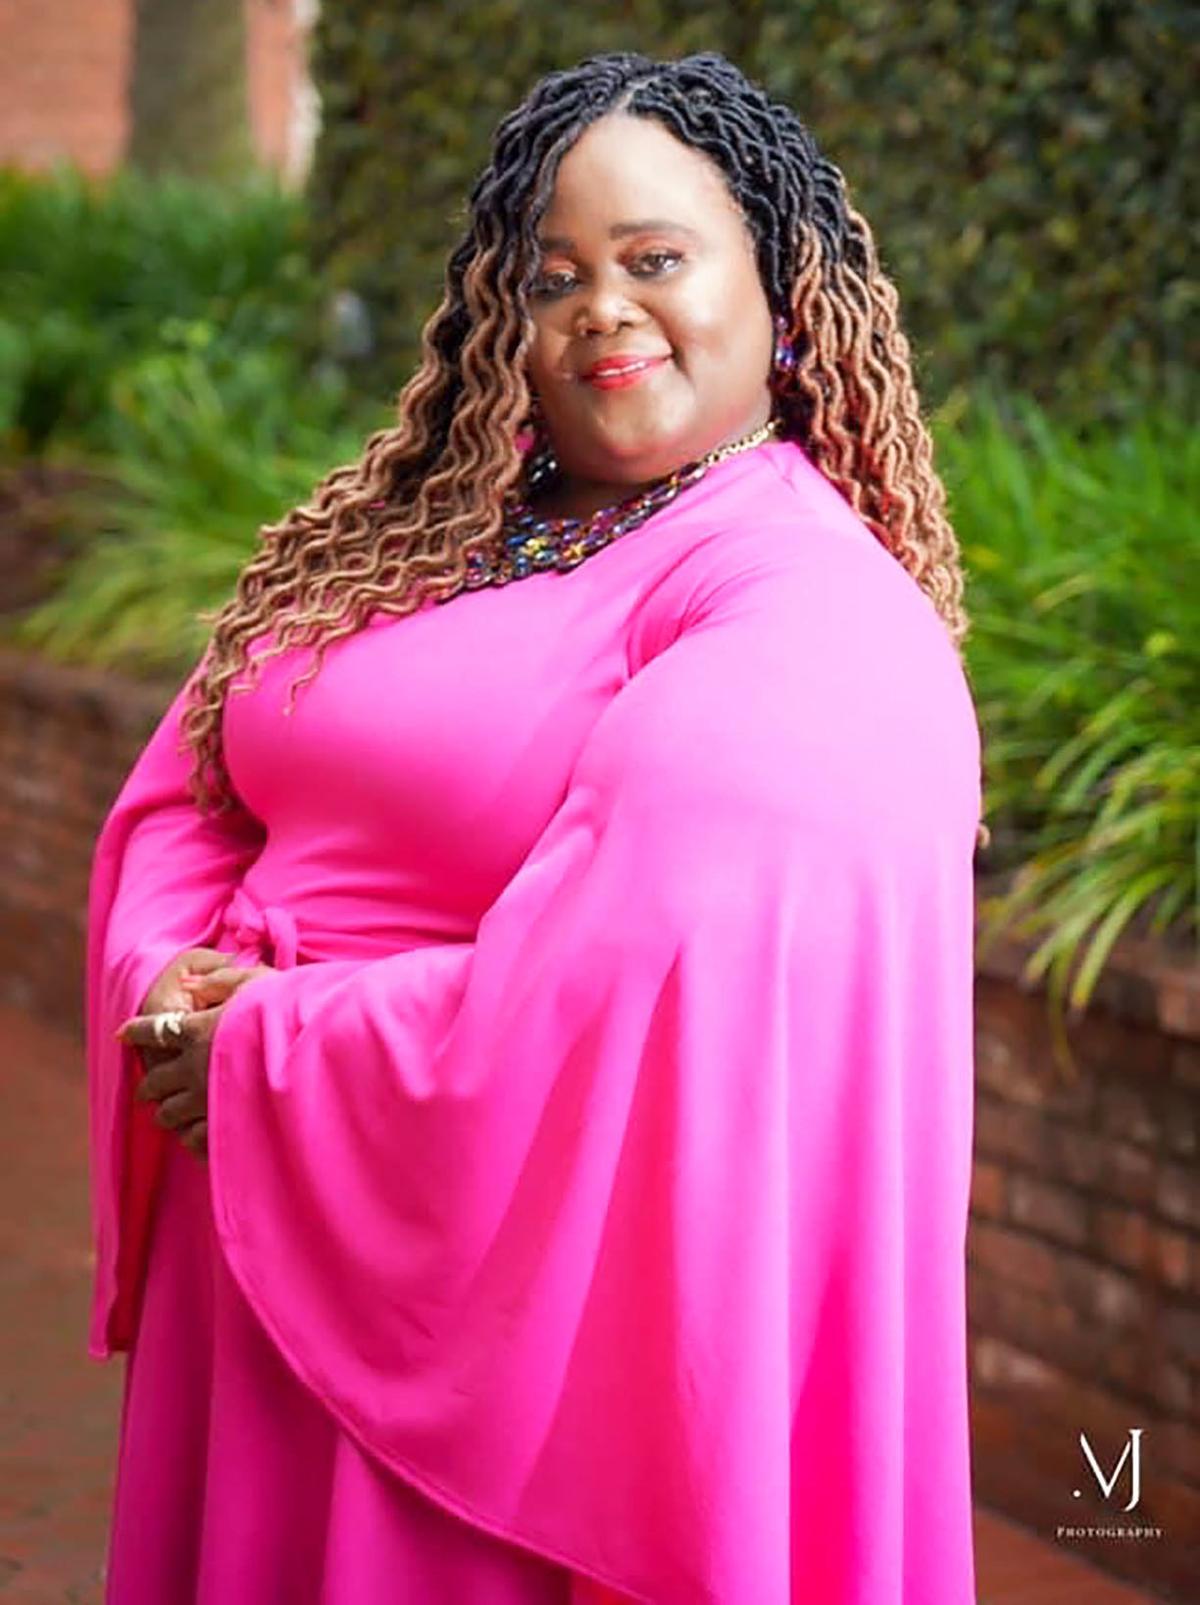 St. Matthews woman wins national plus-size pageant competition | | thetandd.com